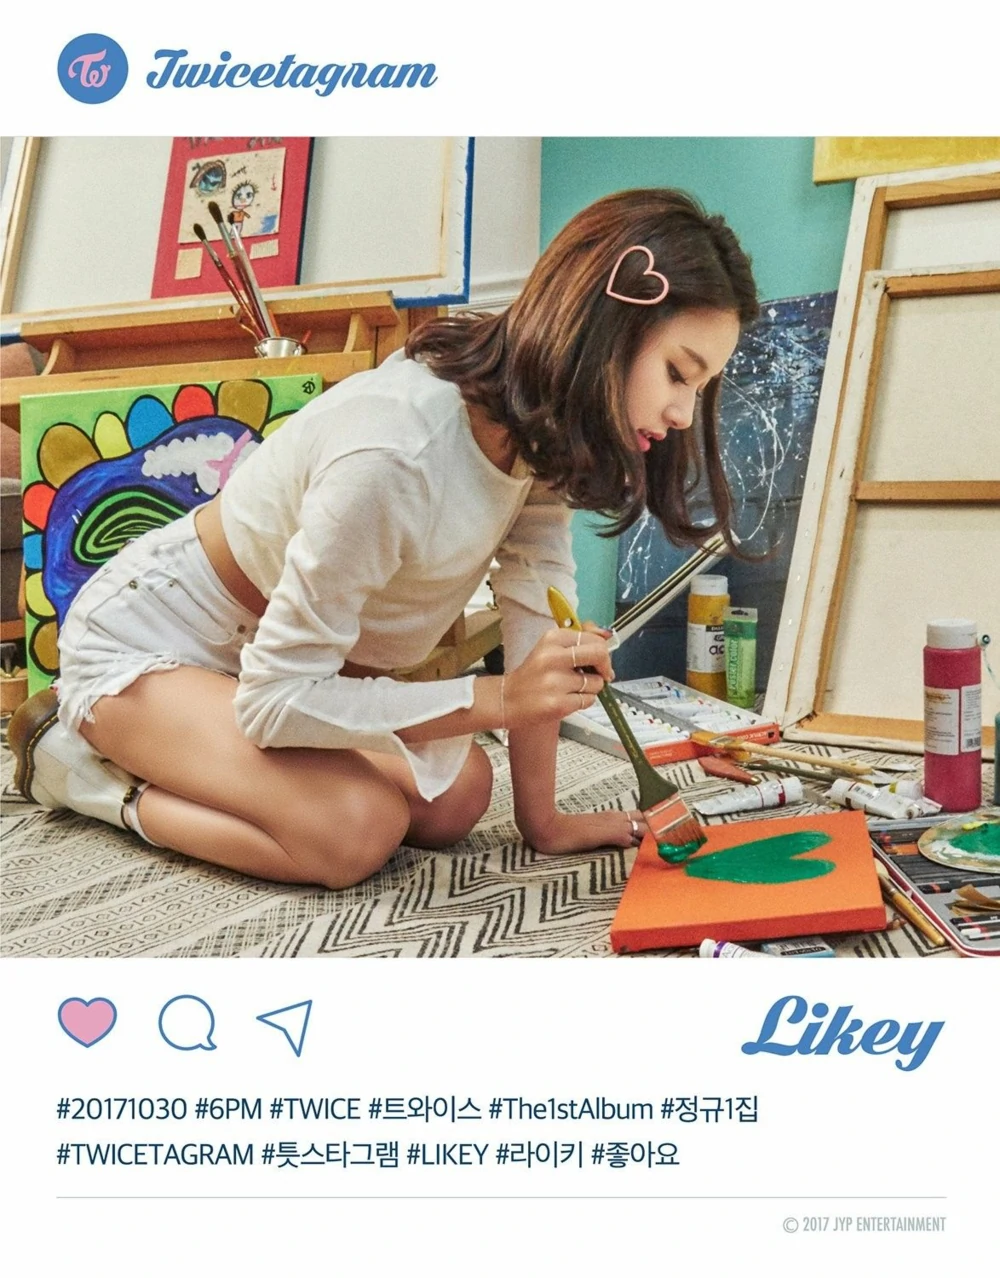 Twice Twicetagram Chaeyoung Concept Teaser Picture Image Photo Kpop K-Concept 1